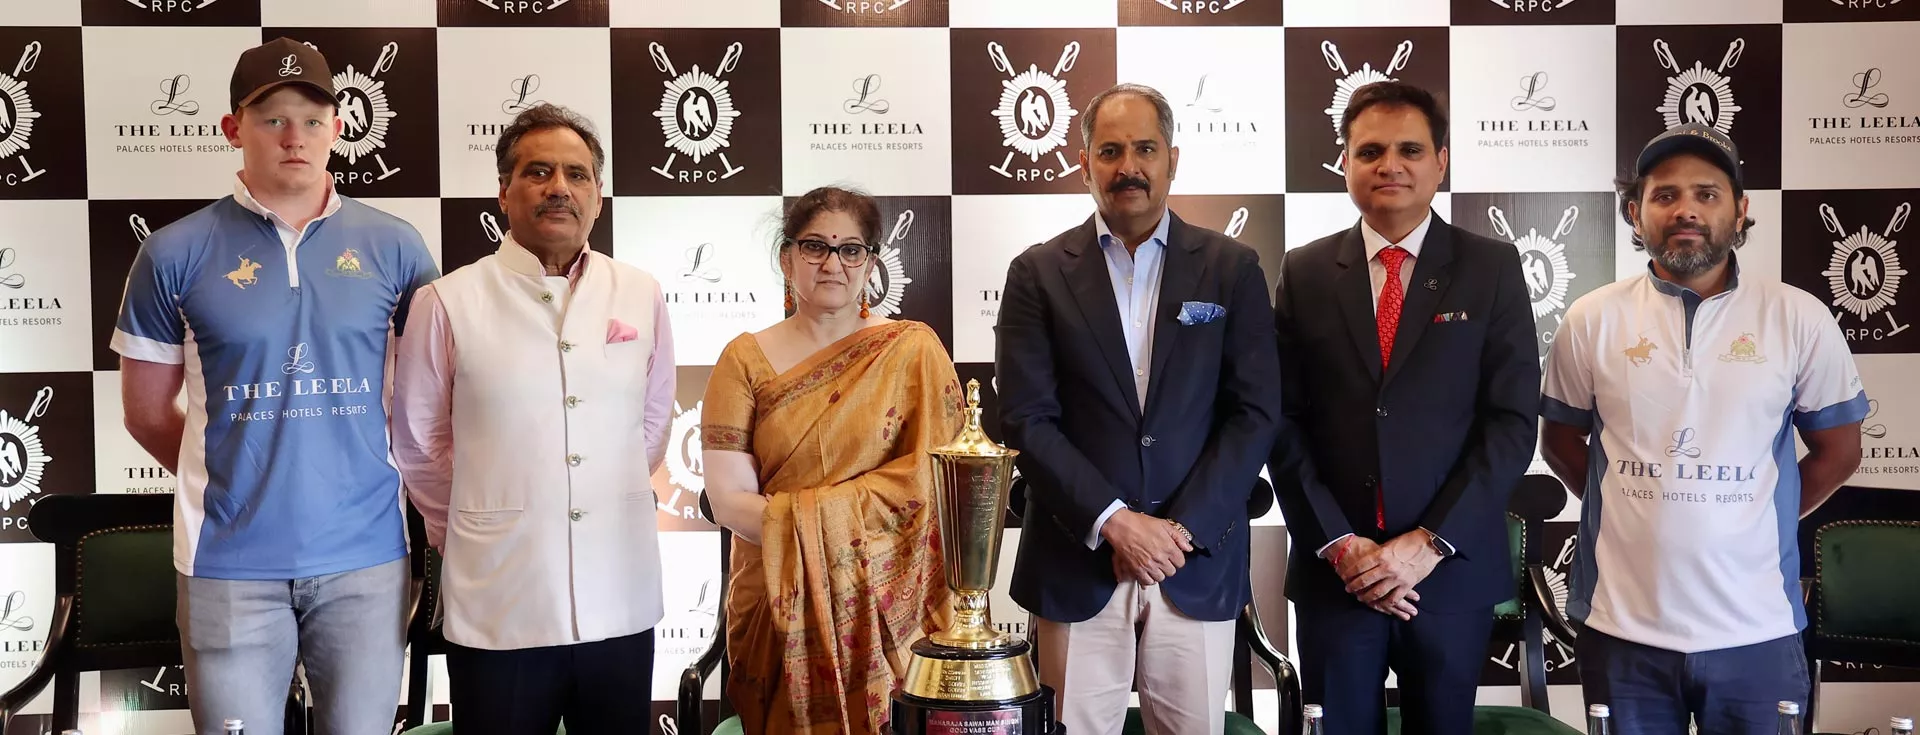 Inaugural sponsorship of The Royal Sport in India